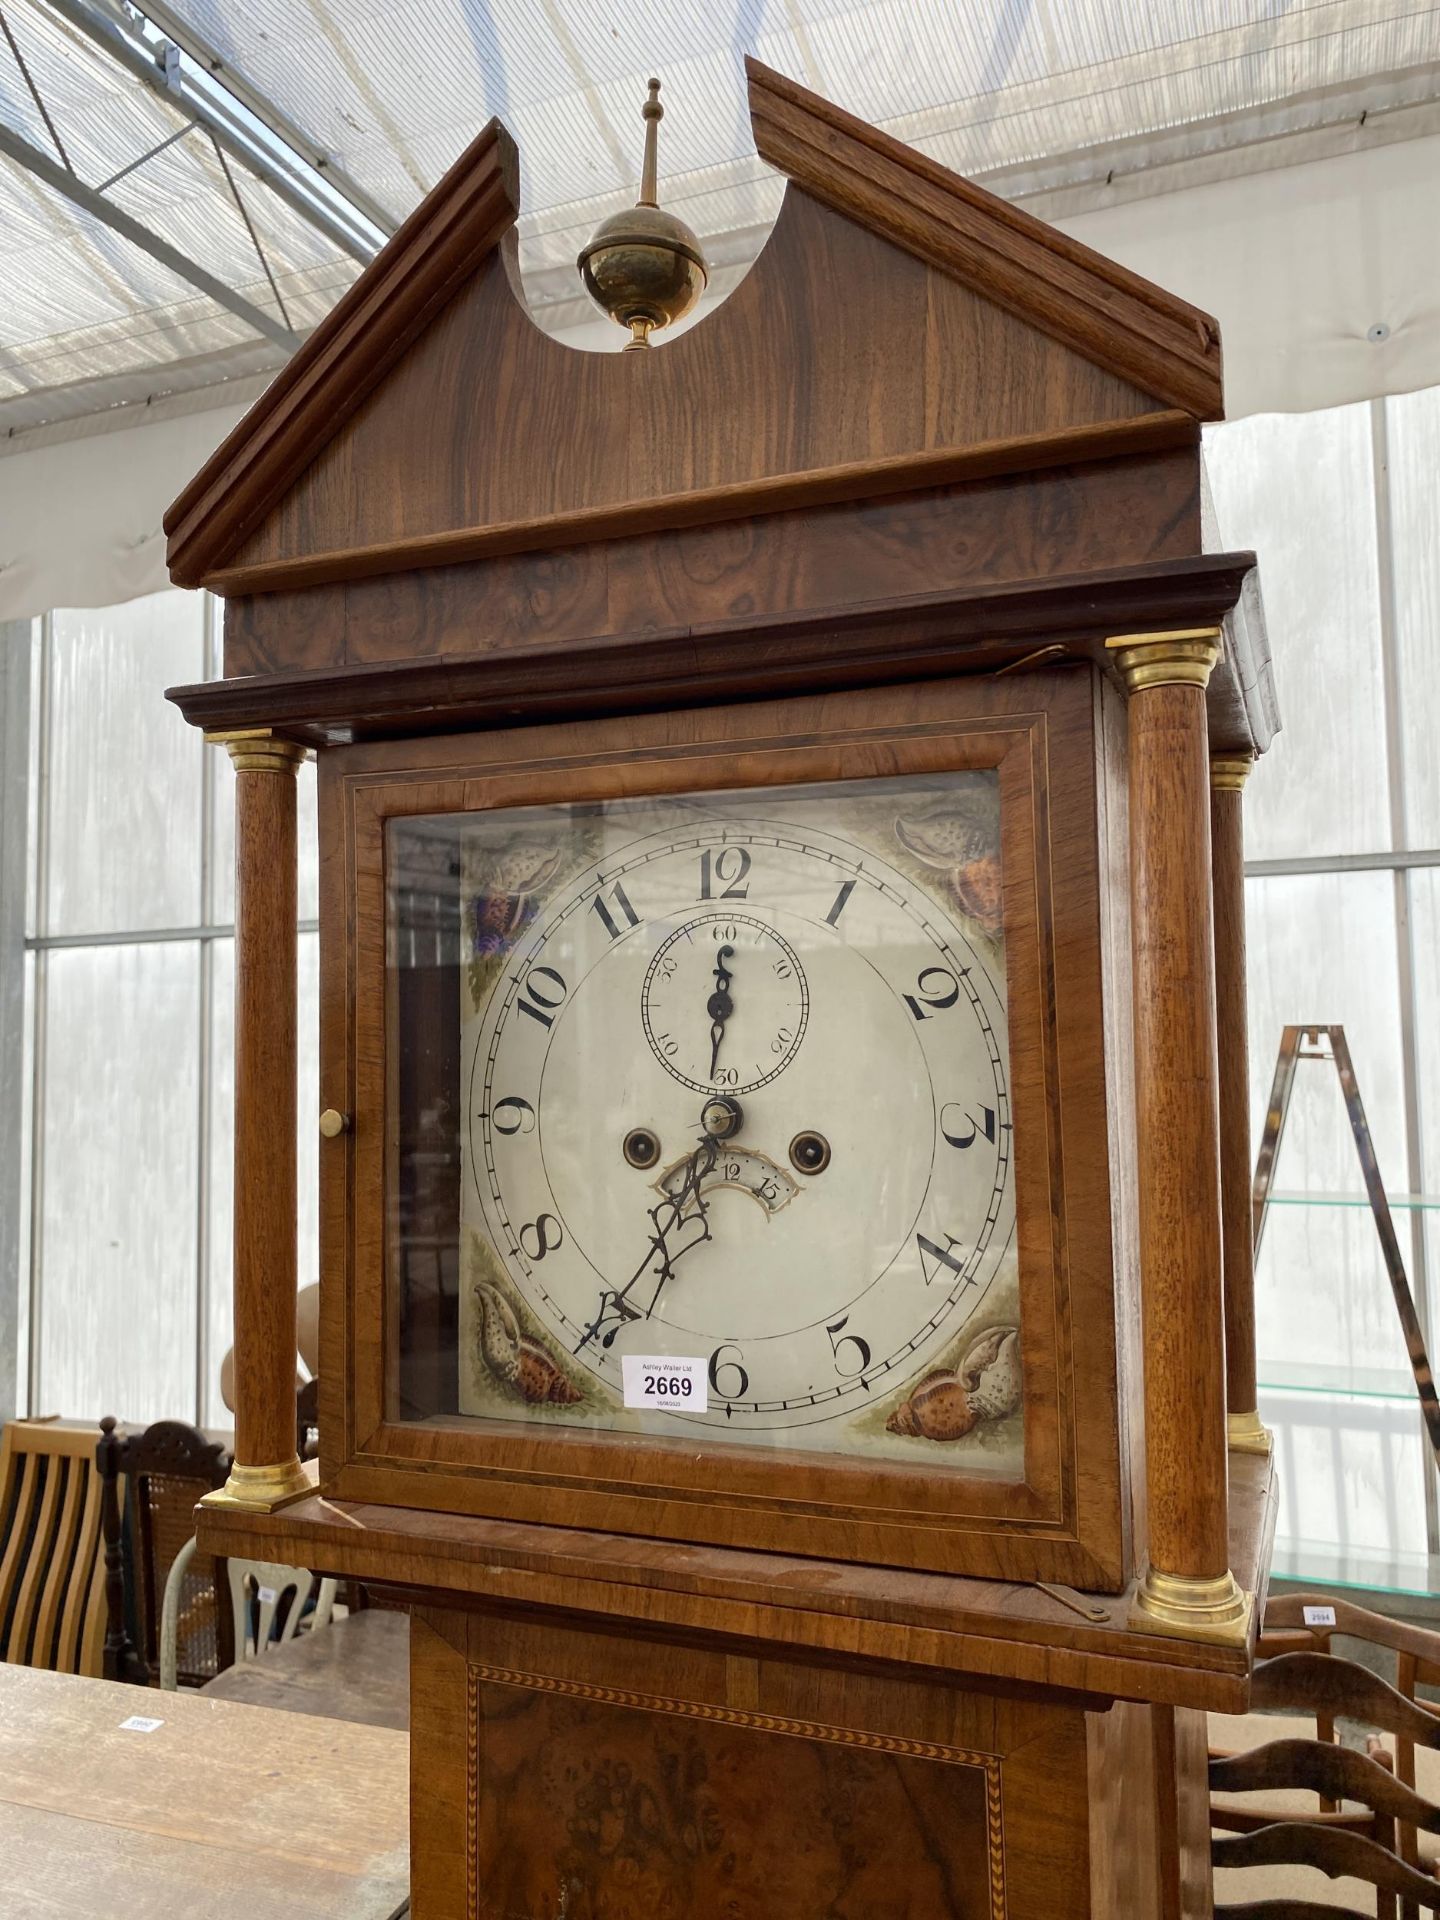 A 19TH CENTURY STYLE WALNUT AND INLAID LONGCASE CLOCK WITH PAINTED DIAL - Image 2 of 6